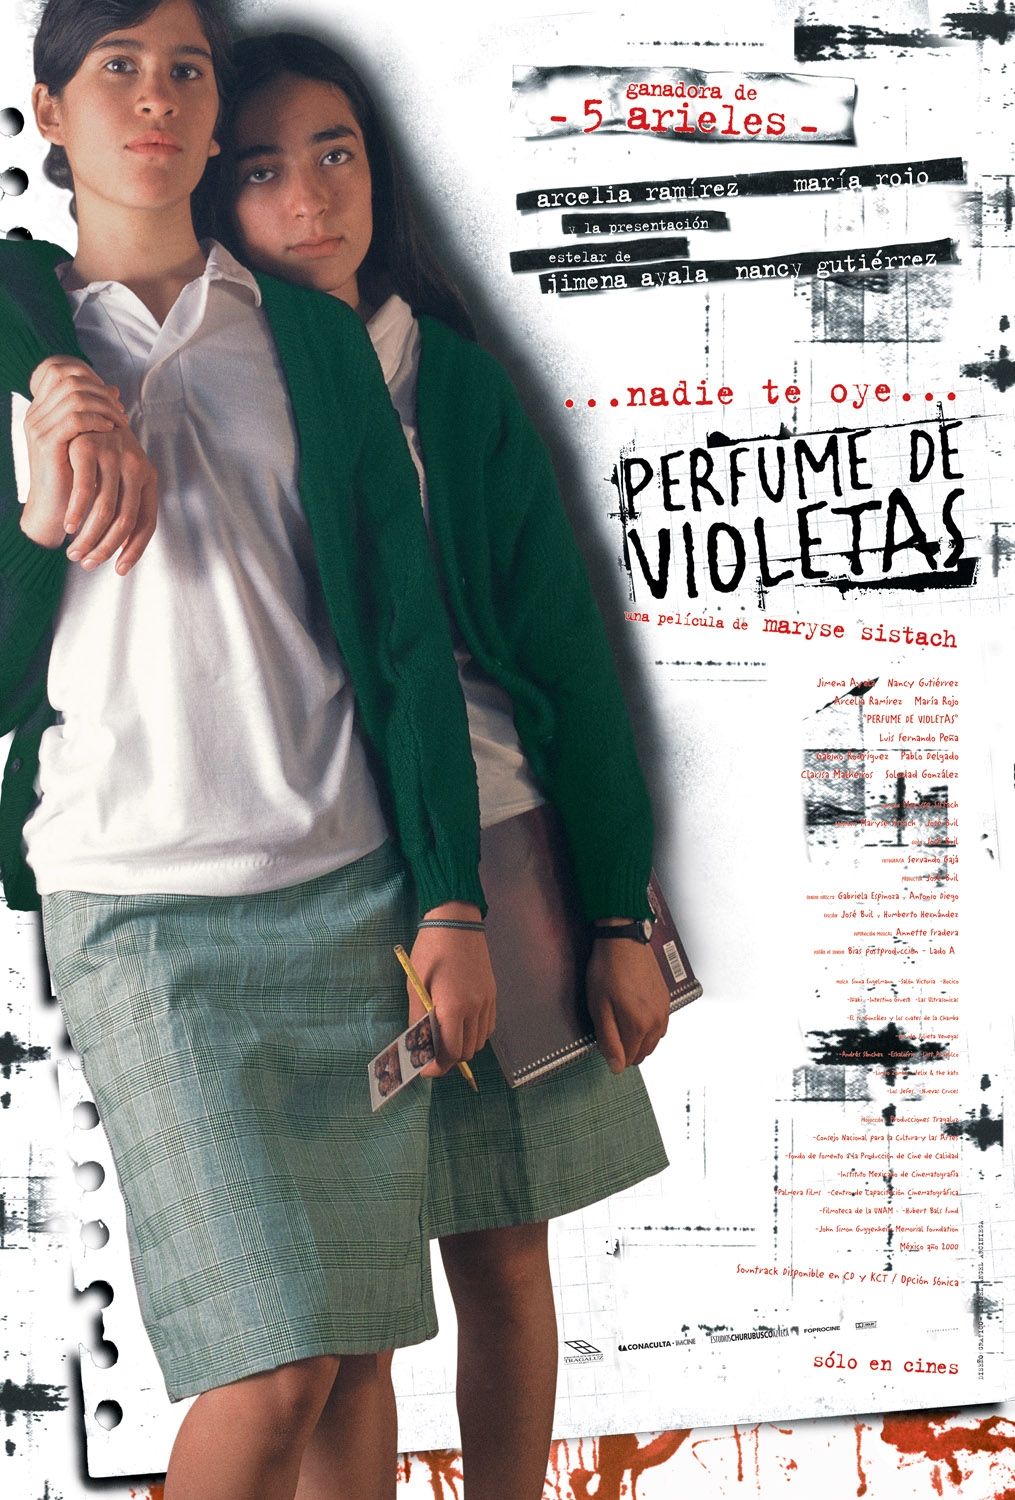 Extra Large Movie Poster Image for Perfume de violetas (#2 of 2)